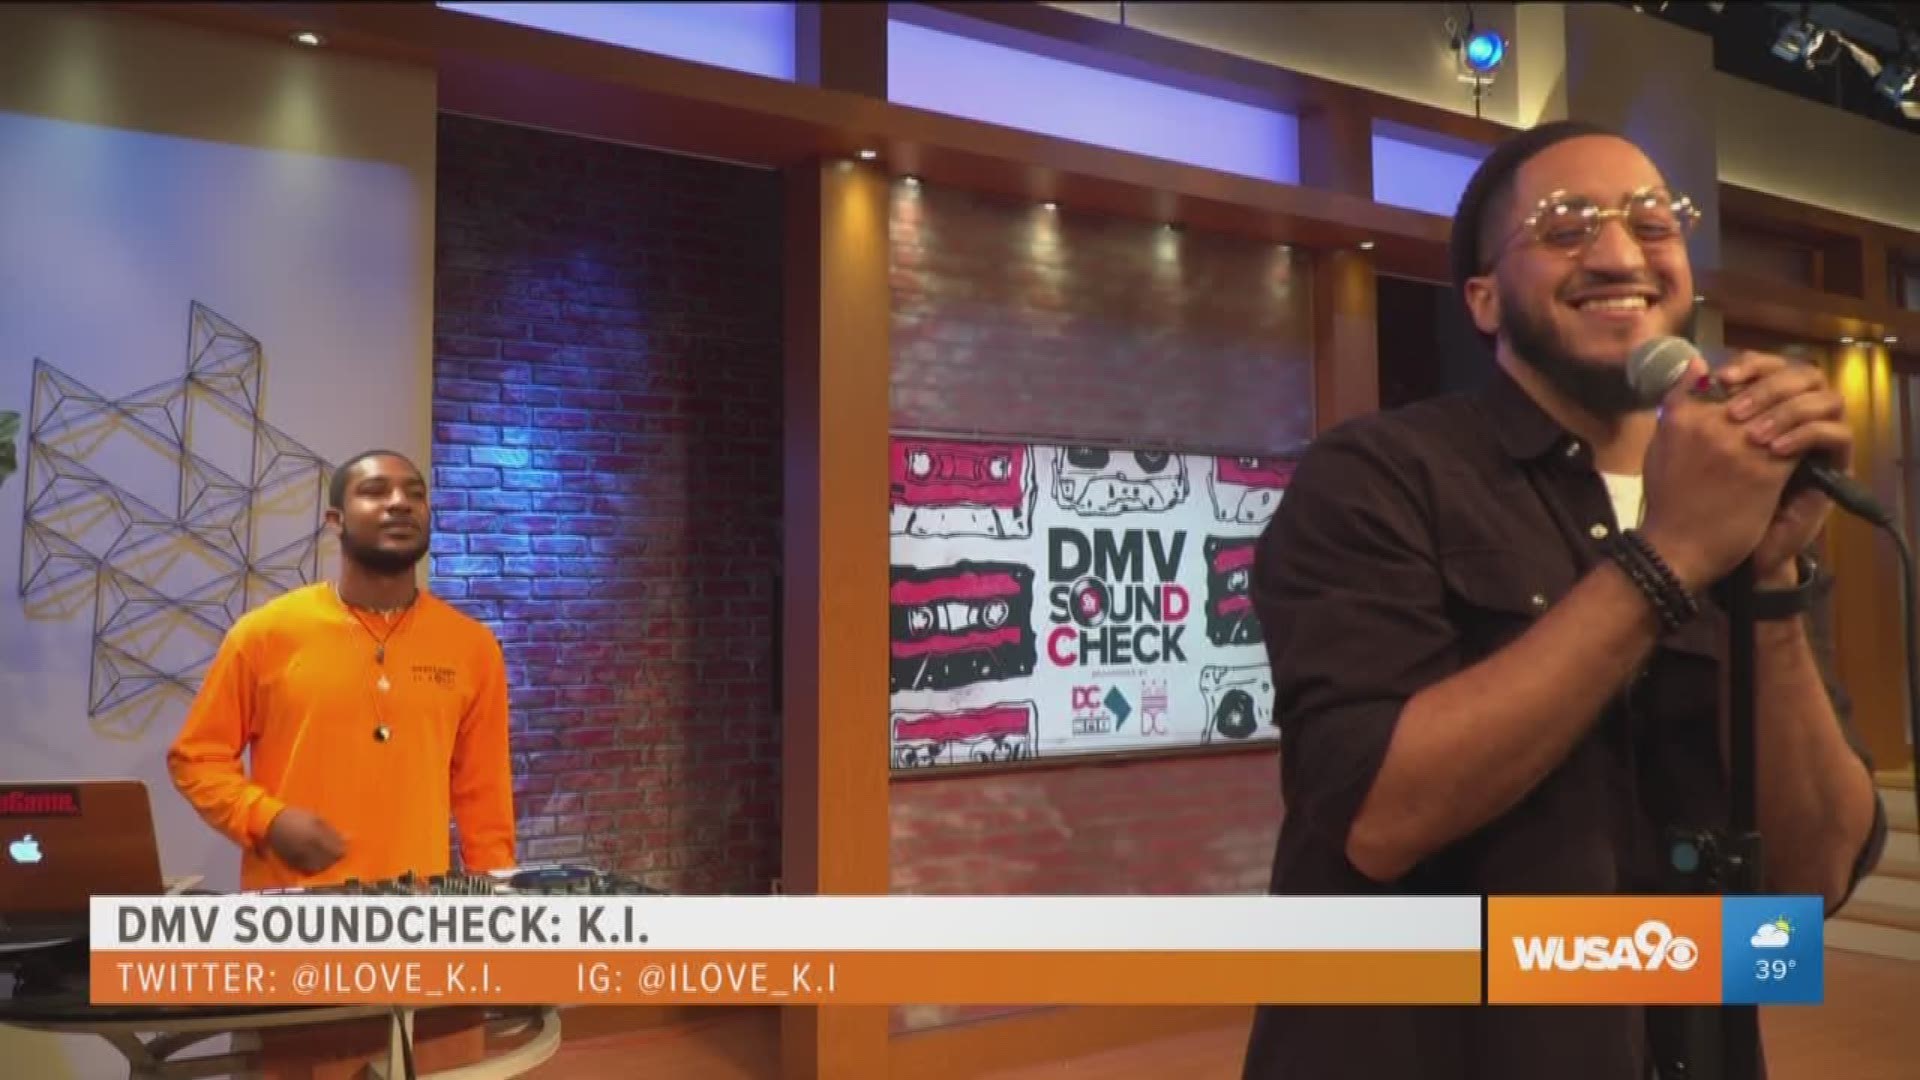 This week's DMV Soundcheck artist is rapper K.I., who has become a DC artist after moving from Detroit 16 years ago. This segment was sponsored by DC OCTFME.